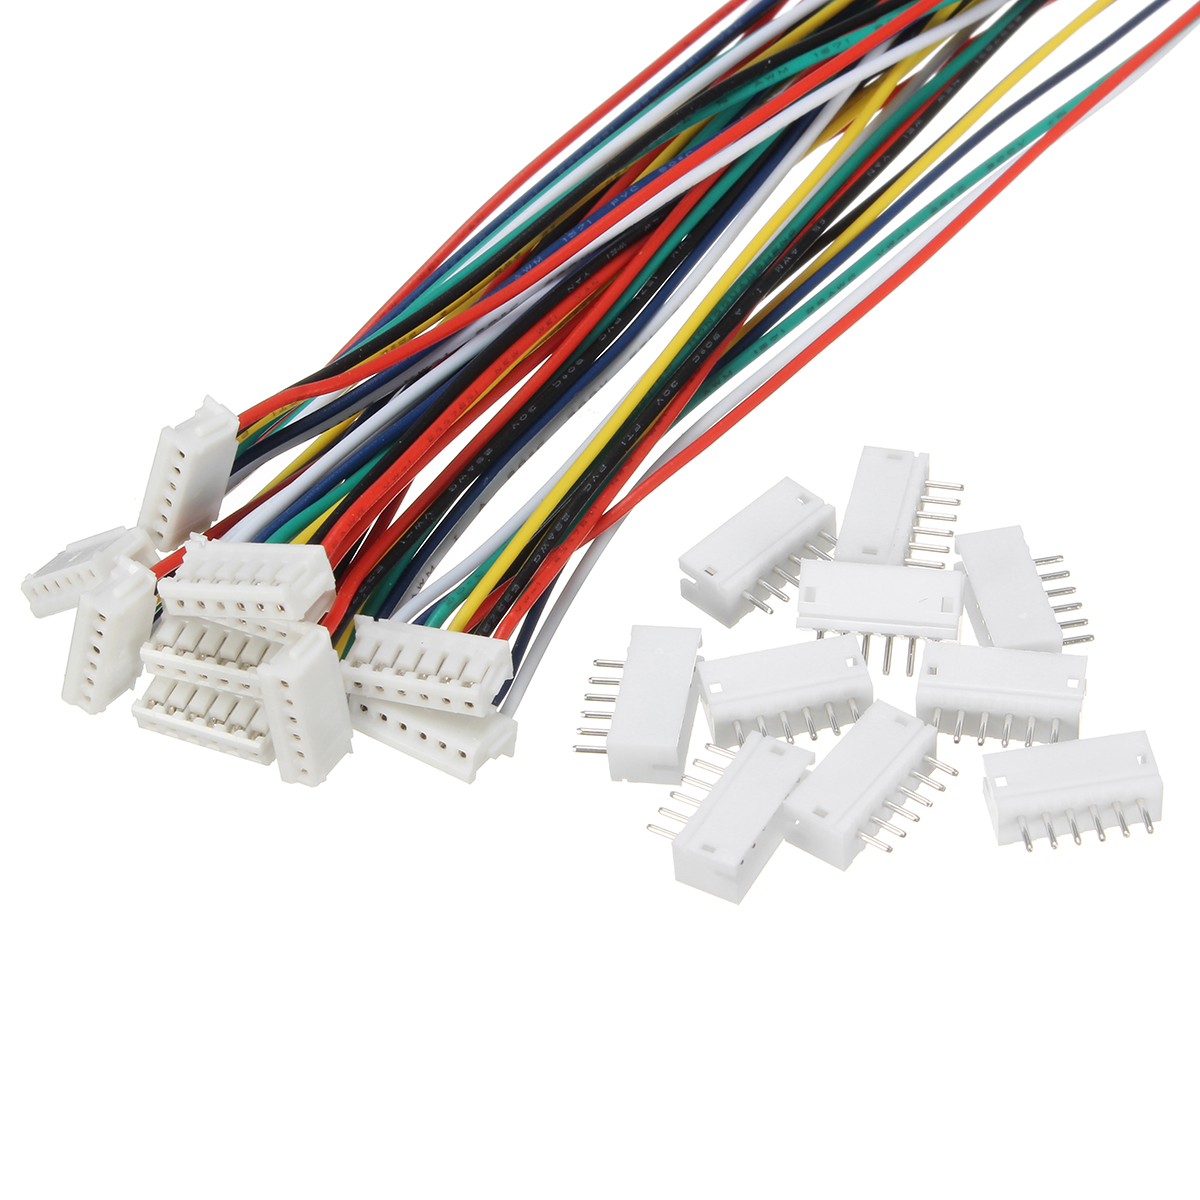 Excellwayreg-Mini-Micro-JST-15mm-ZH-6-Pin-Connector-Plug-and-Wires-Cables-15cm-10-Set-1170230-2